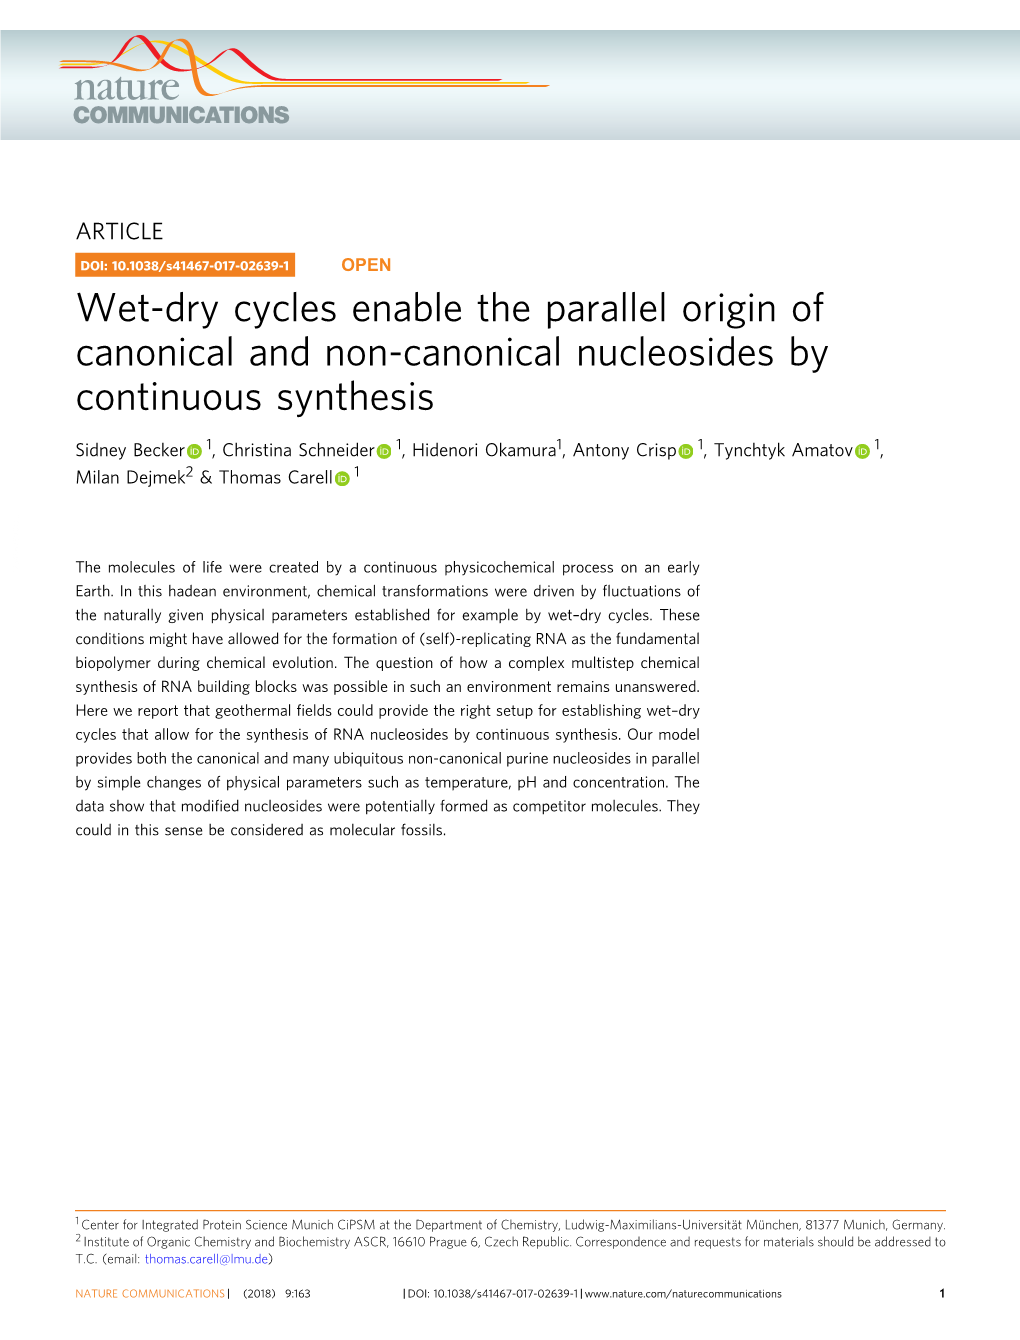 Wet-Dry Cycles Enable the Parallel Origin of Canonical and Non-Canonical Nucleosides by Continuous Synthesis